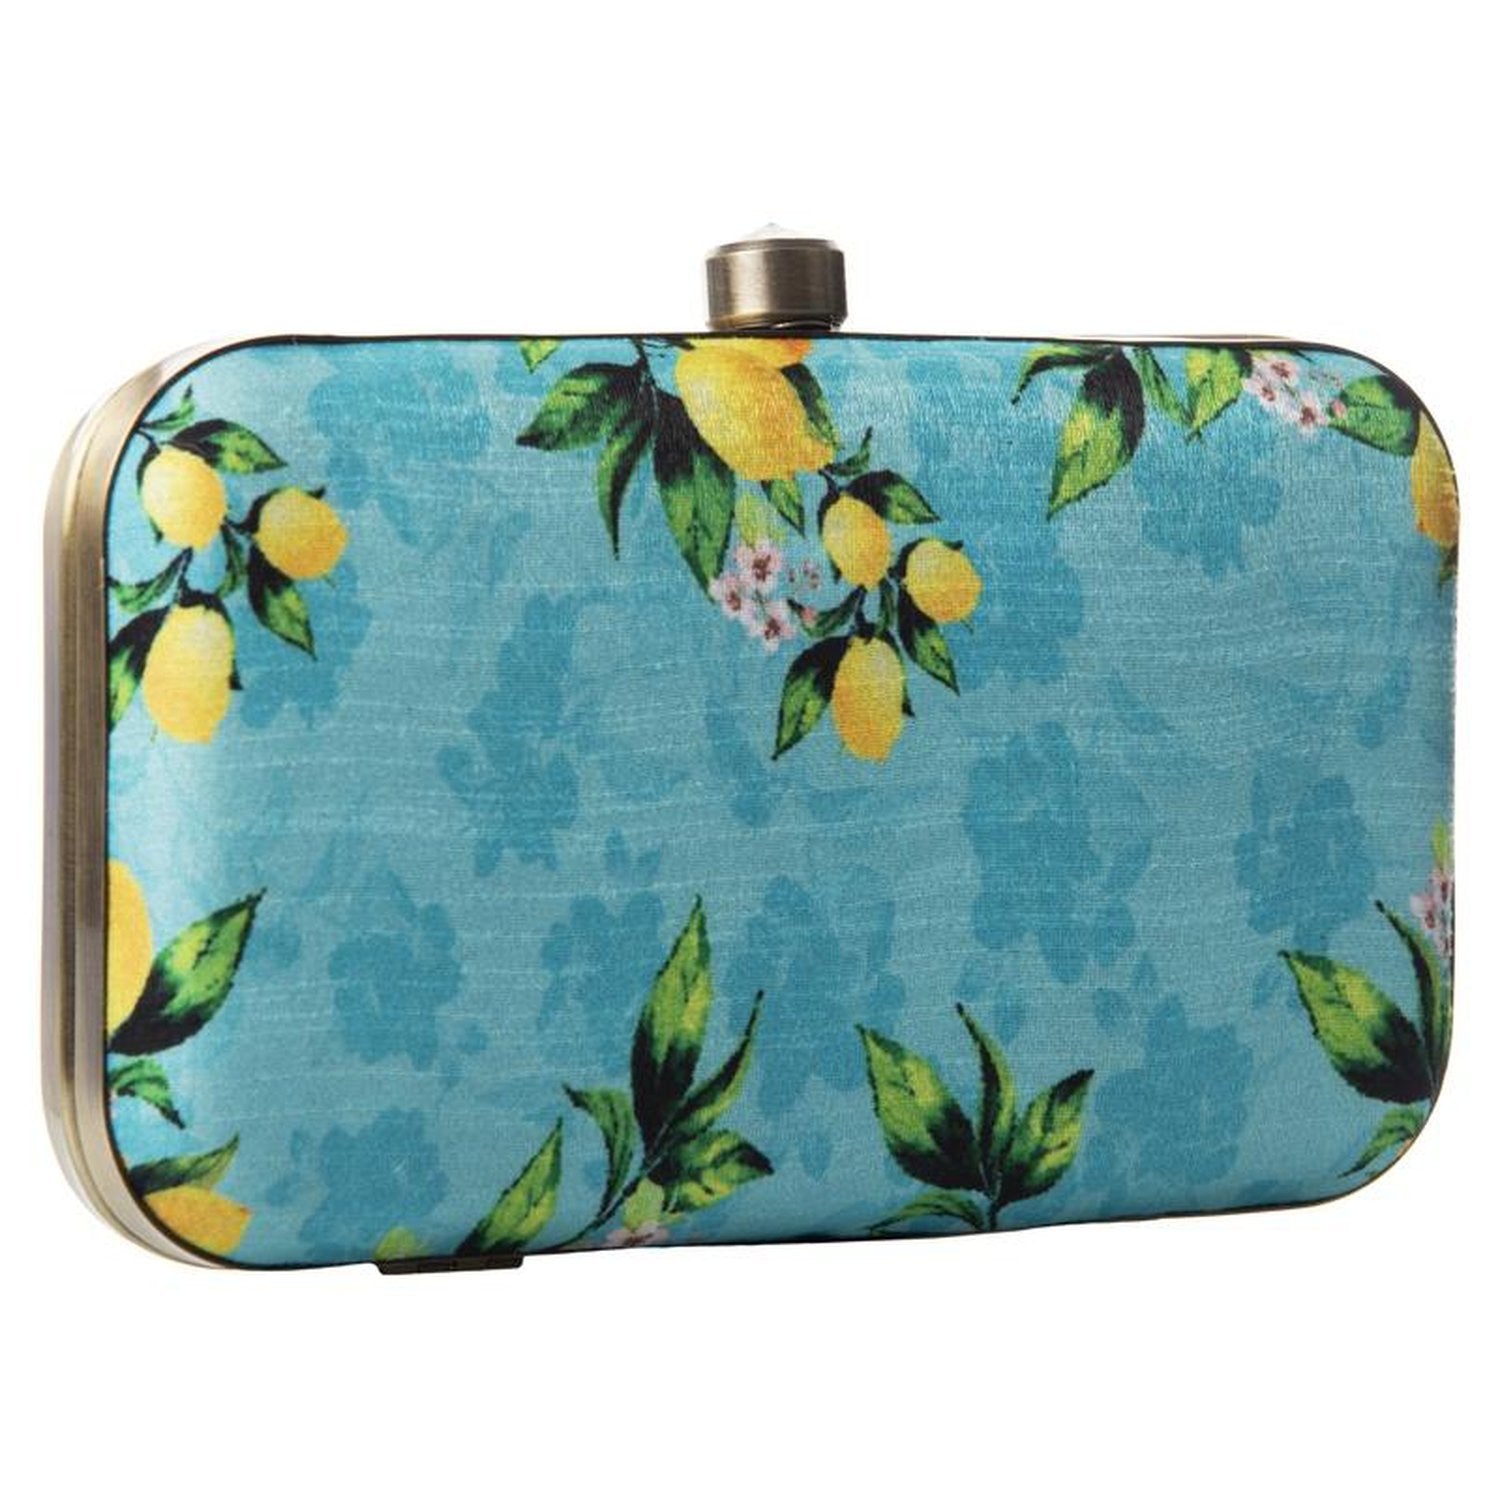 Designer Clutches & Purses - Exclusive collection of gifts by Wedtree